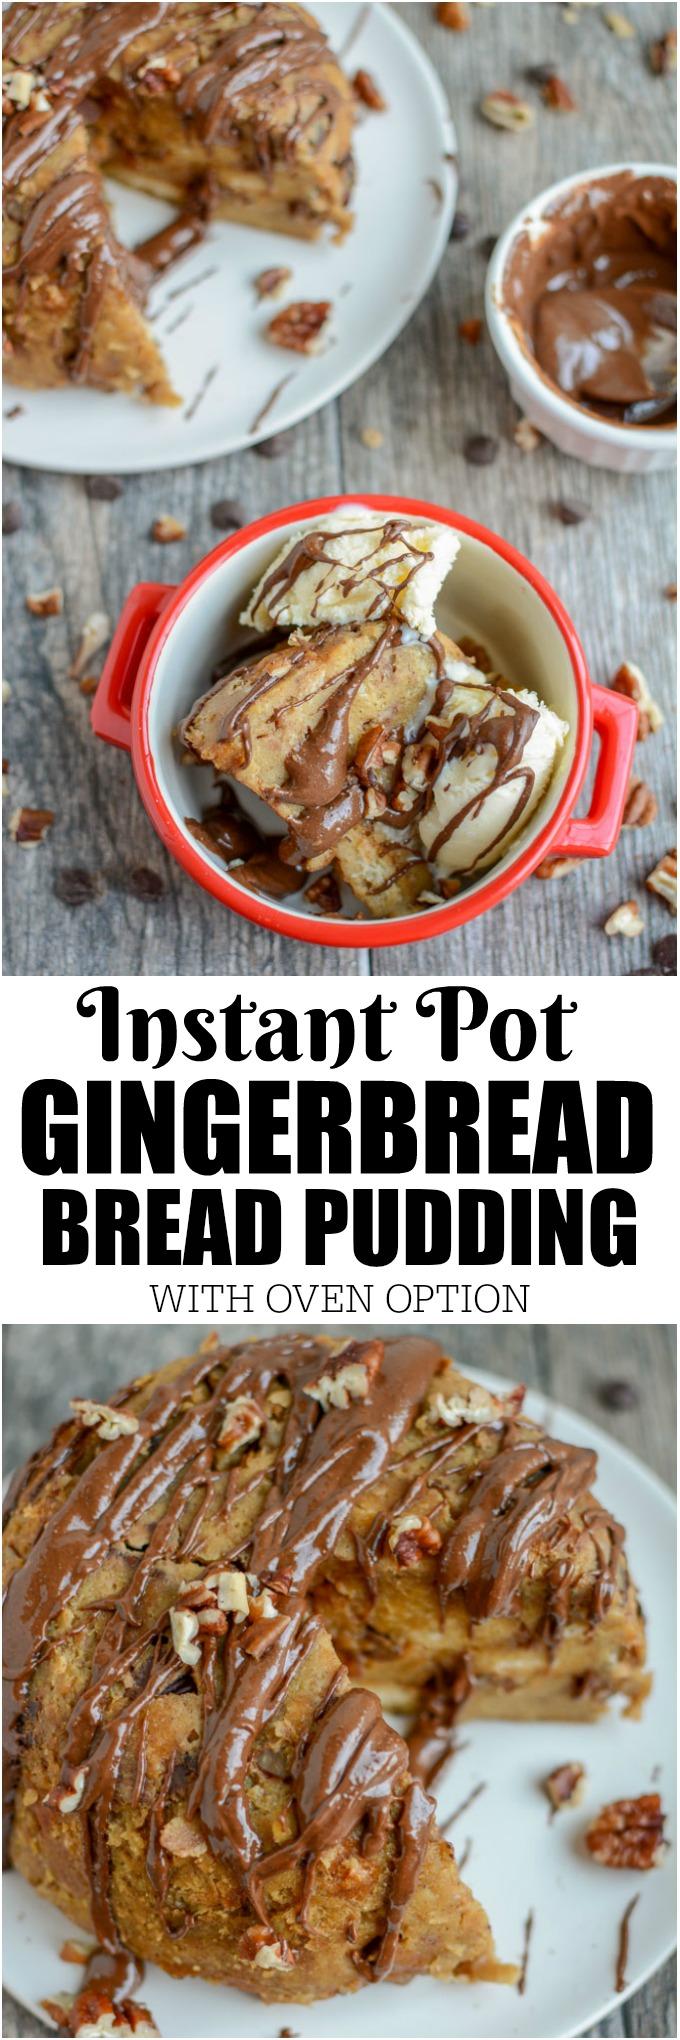 This Instant Pot Gingerbread Bread Pudding is the perfect dessert for a holiday party or family gathering. It can also be made in the oven!